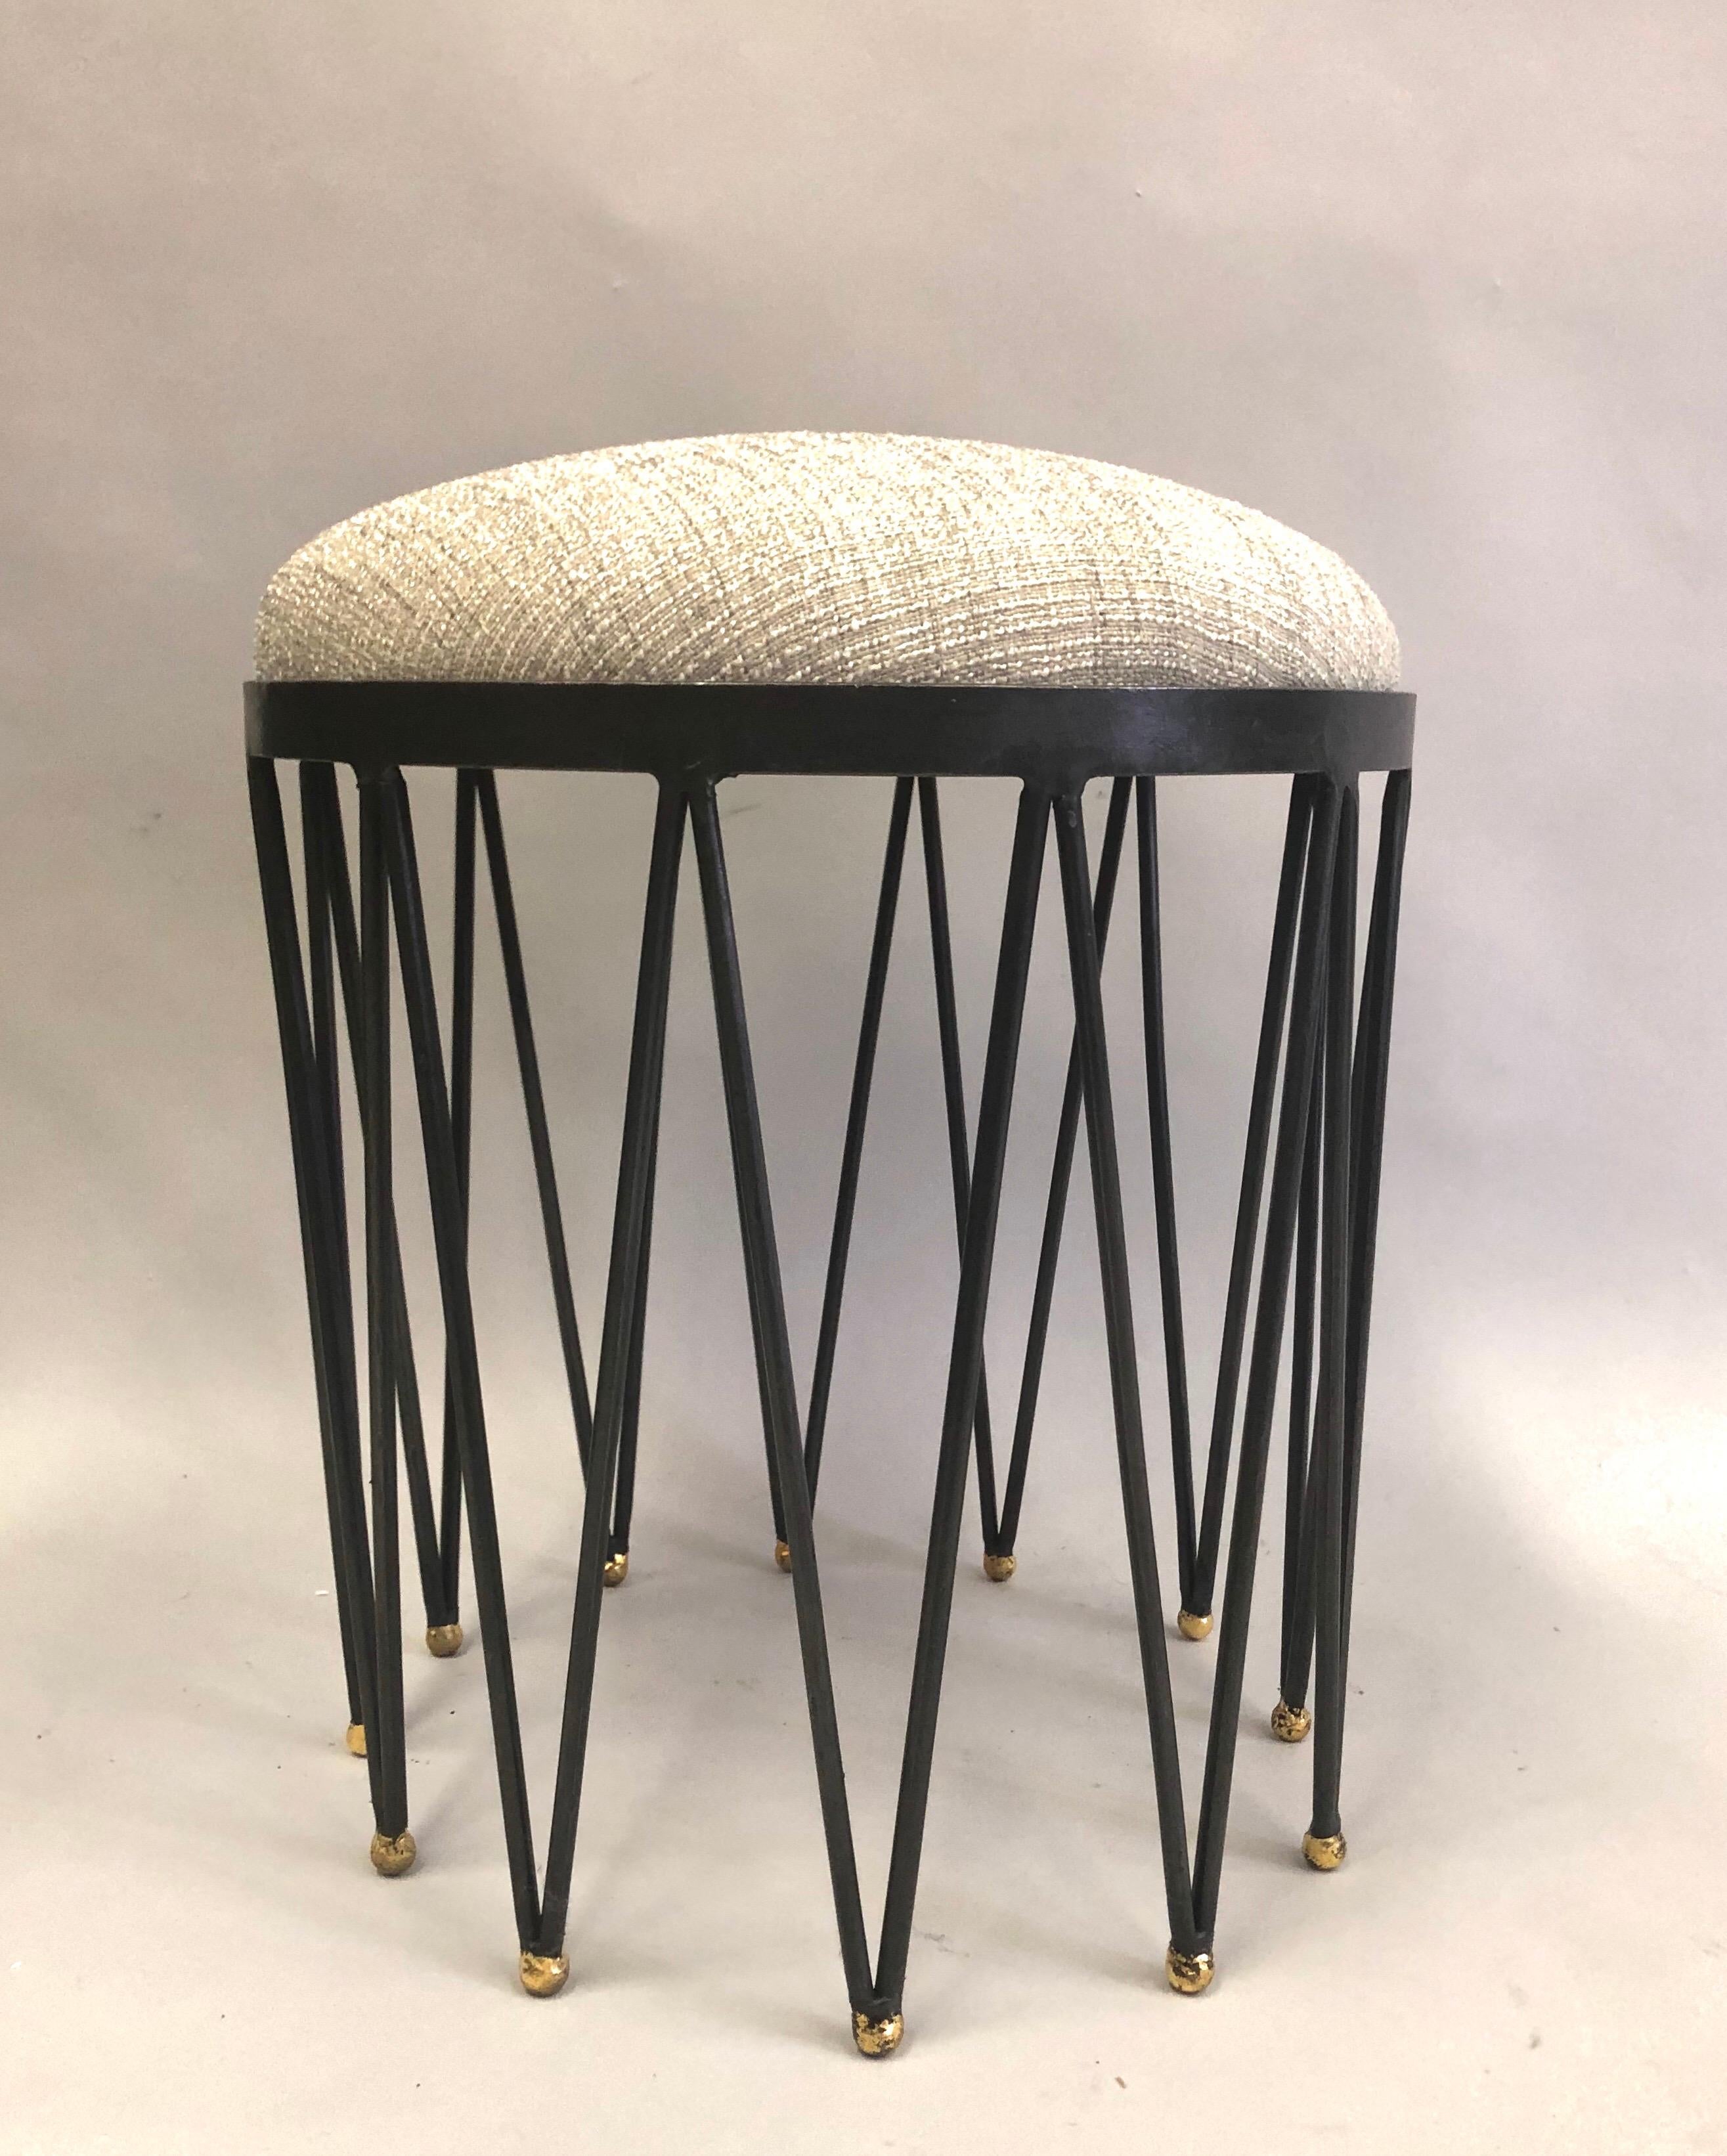 2 elegant and timeless French modern neoclassical gilt iron stools or benches attributed to Gilbert Poillerat. The pieces of a wood and upholstery seat set into a unique handwrought iron frame in lozenge pattern ending in round ball feet that have